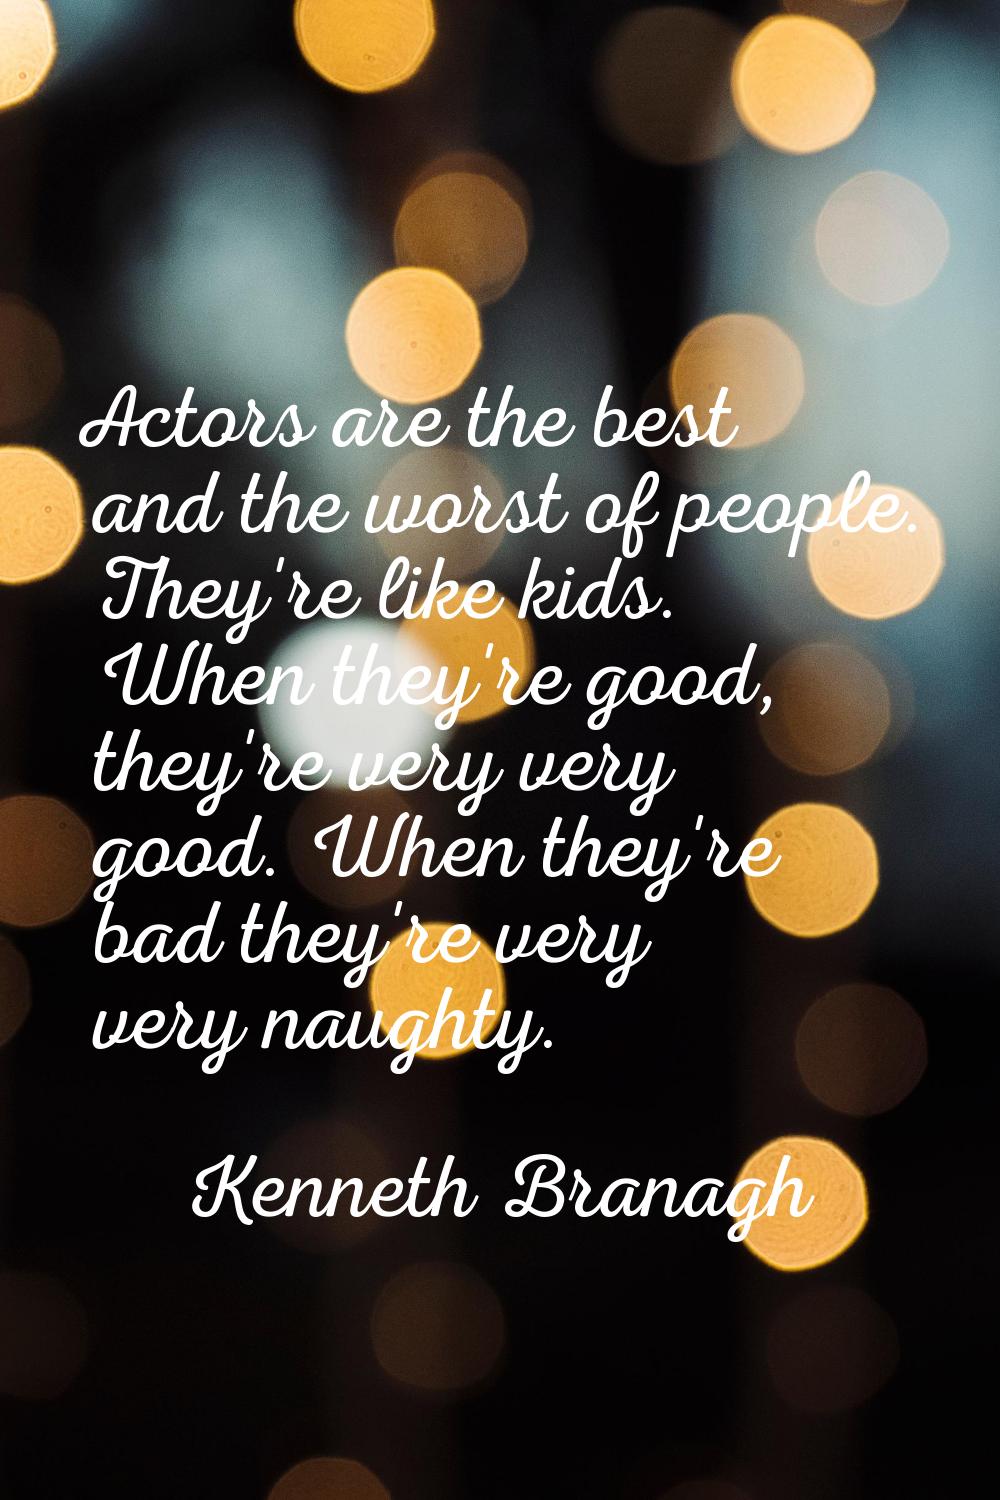 Actors are the best and the worst of people. They're like kids. When they're good, they're very ver